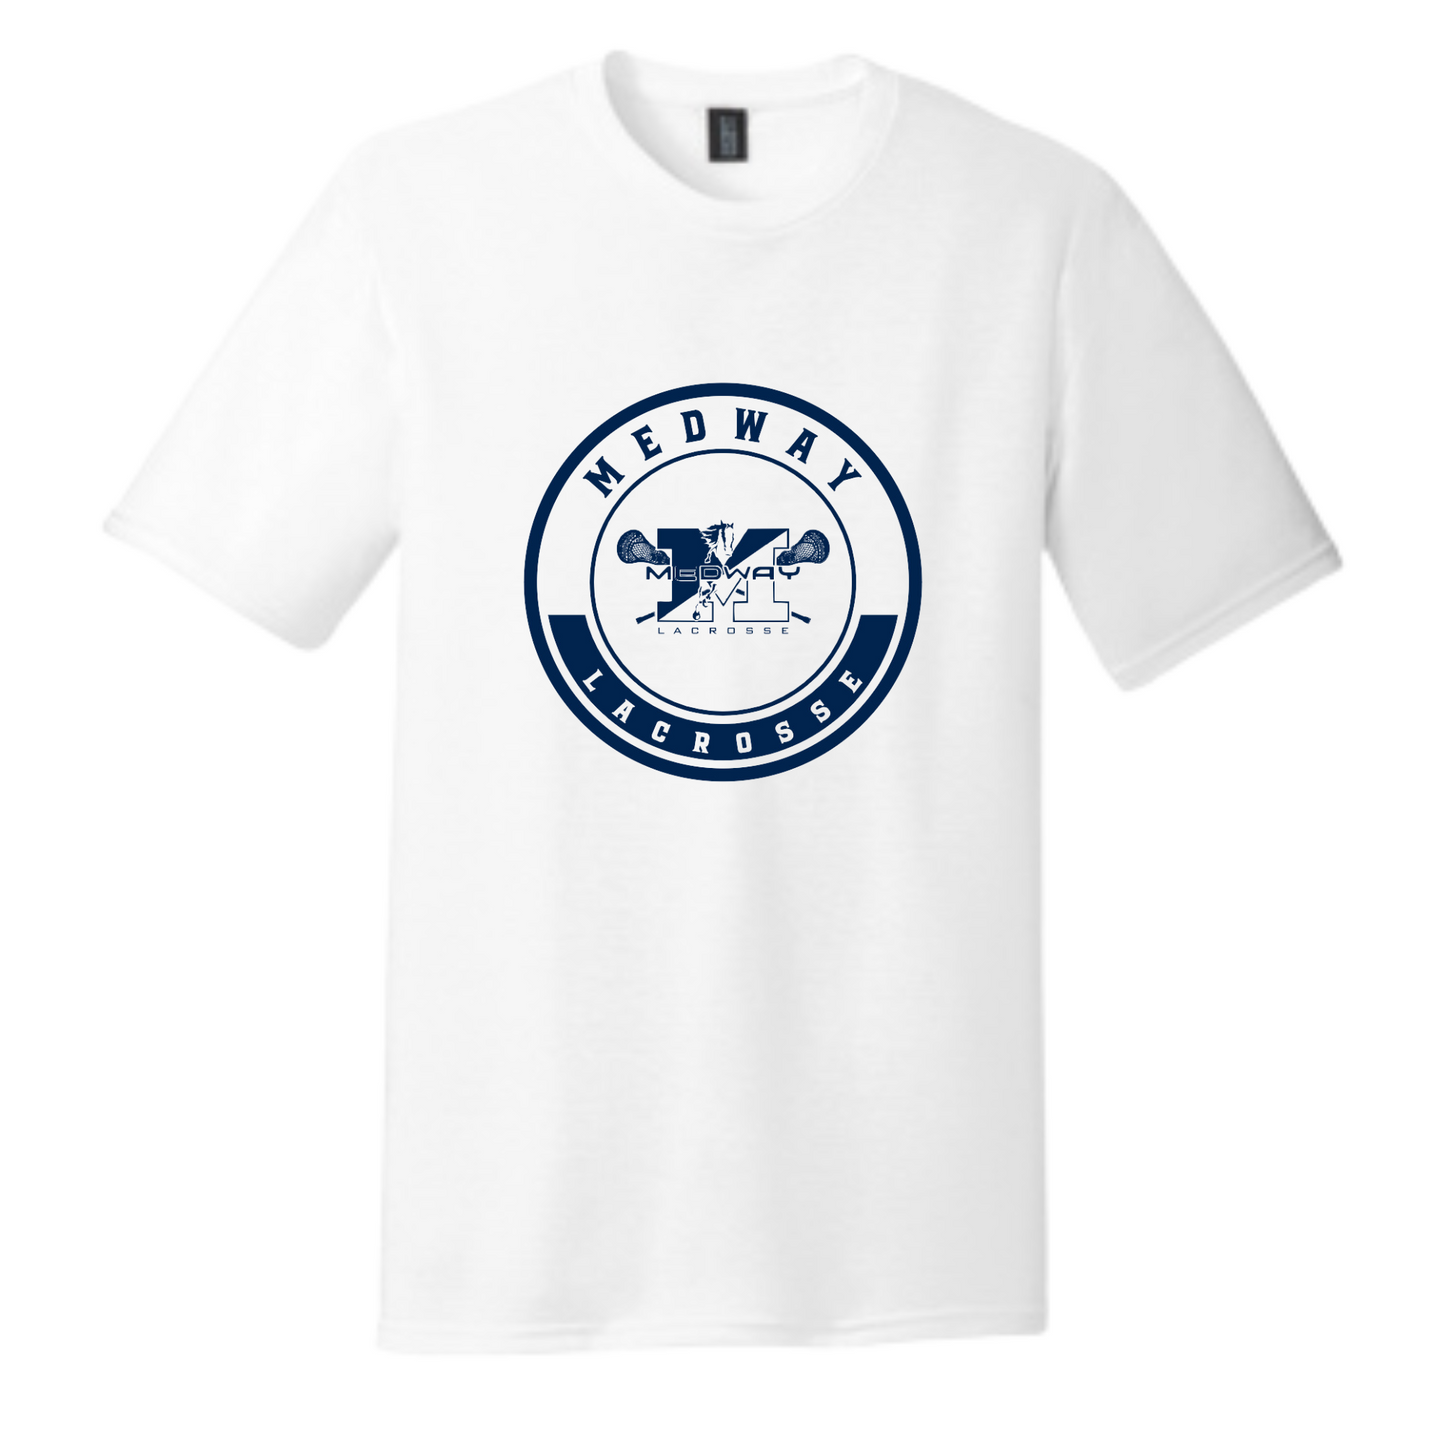 MEDWAY YOUTH LACROSSE CIRCLE LOGO ADULT TEE - WHITE